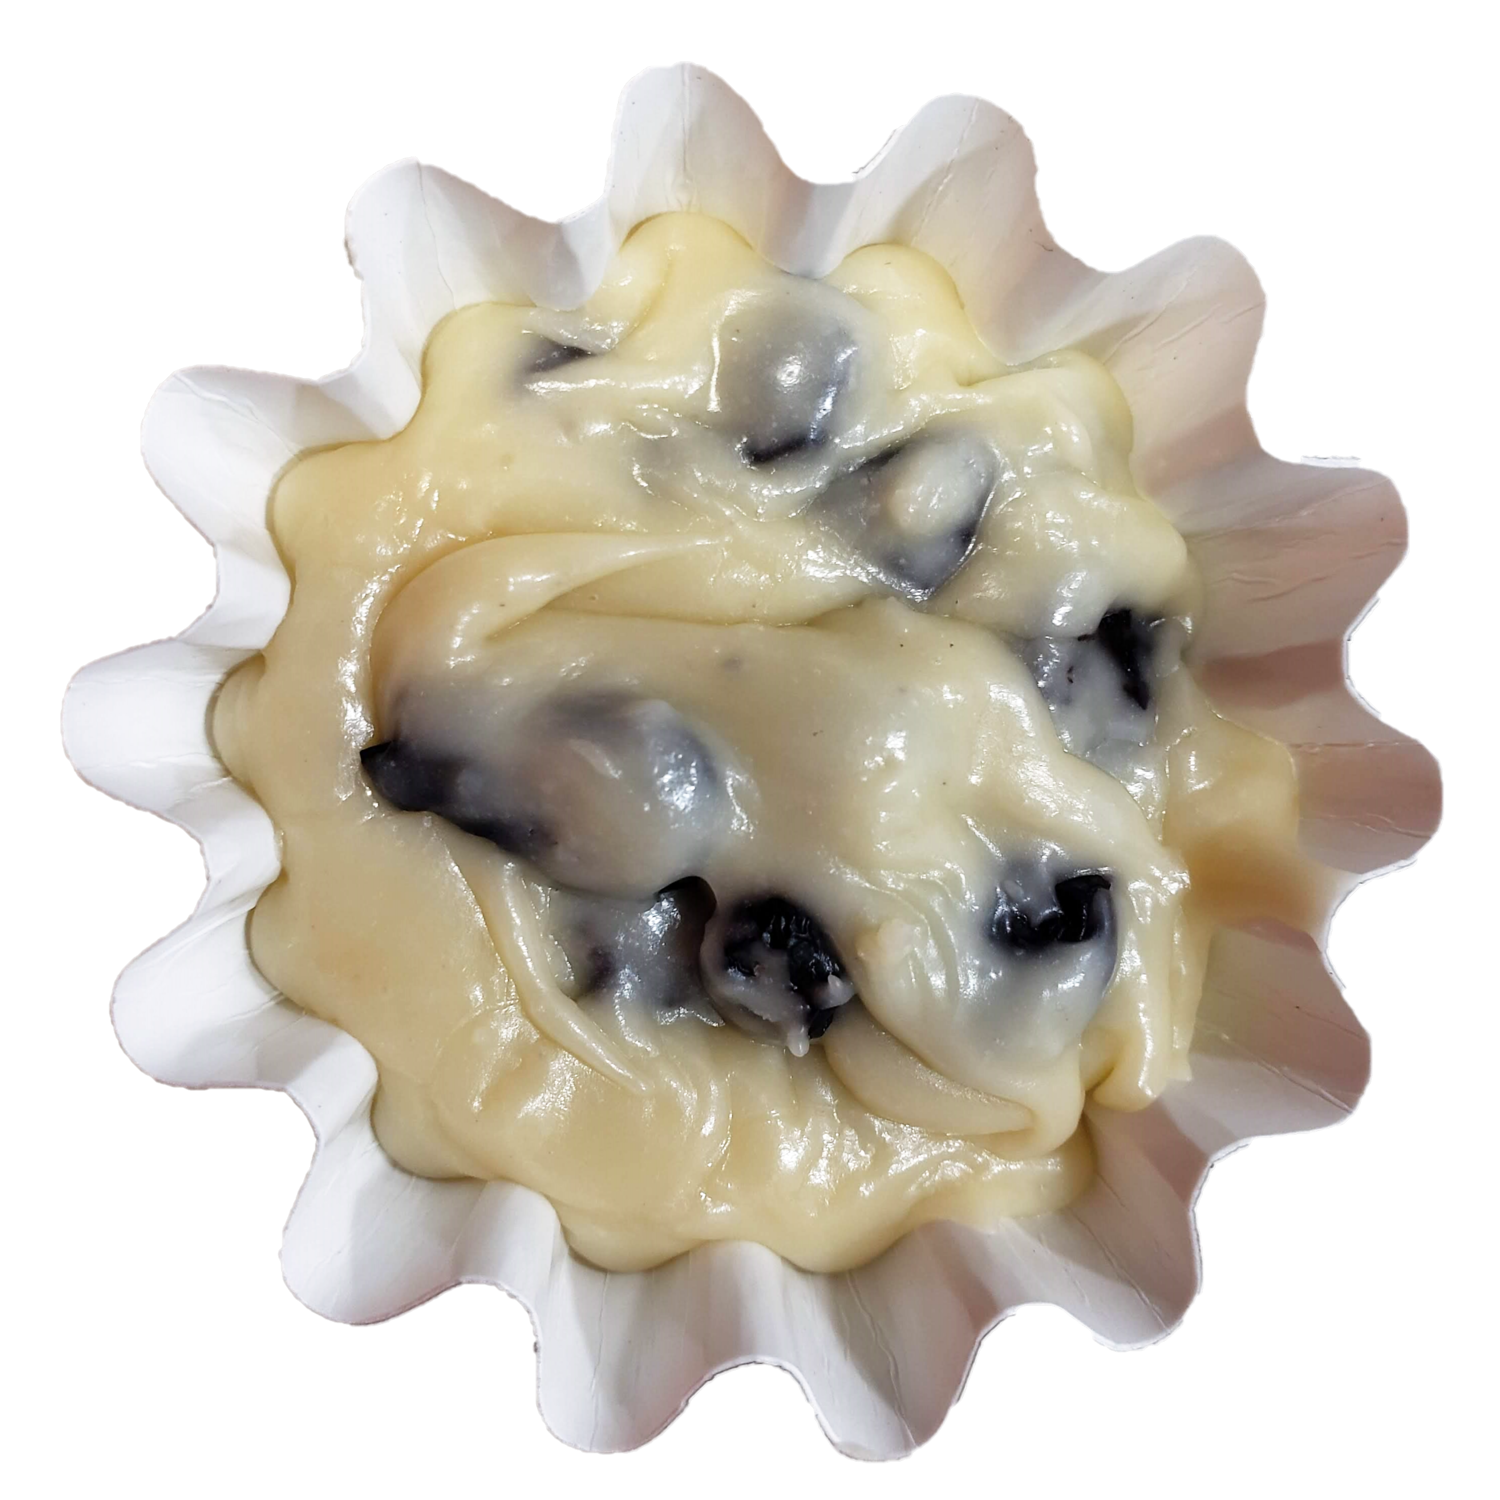 Blueberry Cheesecake Fudge Cup - 2.25 Ounces